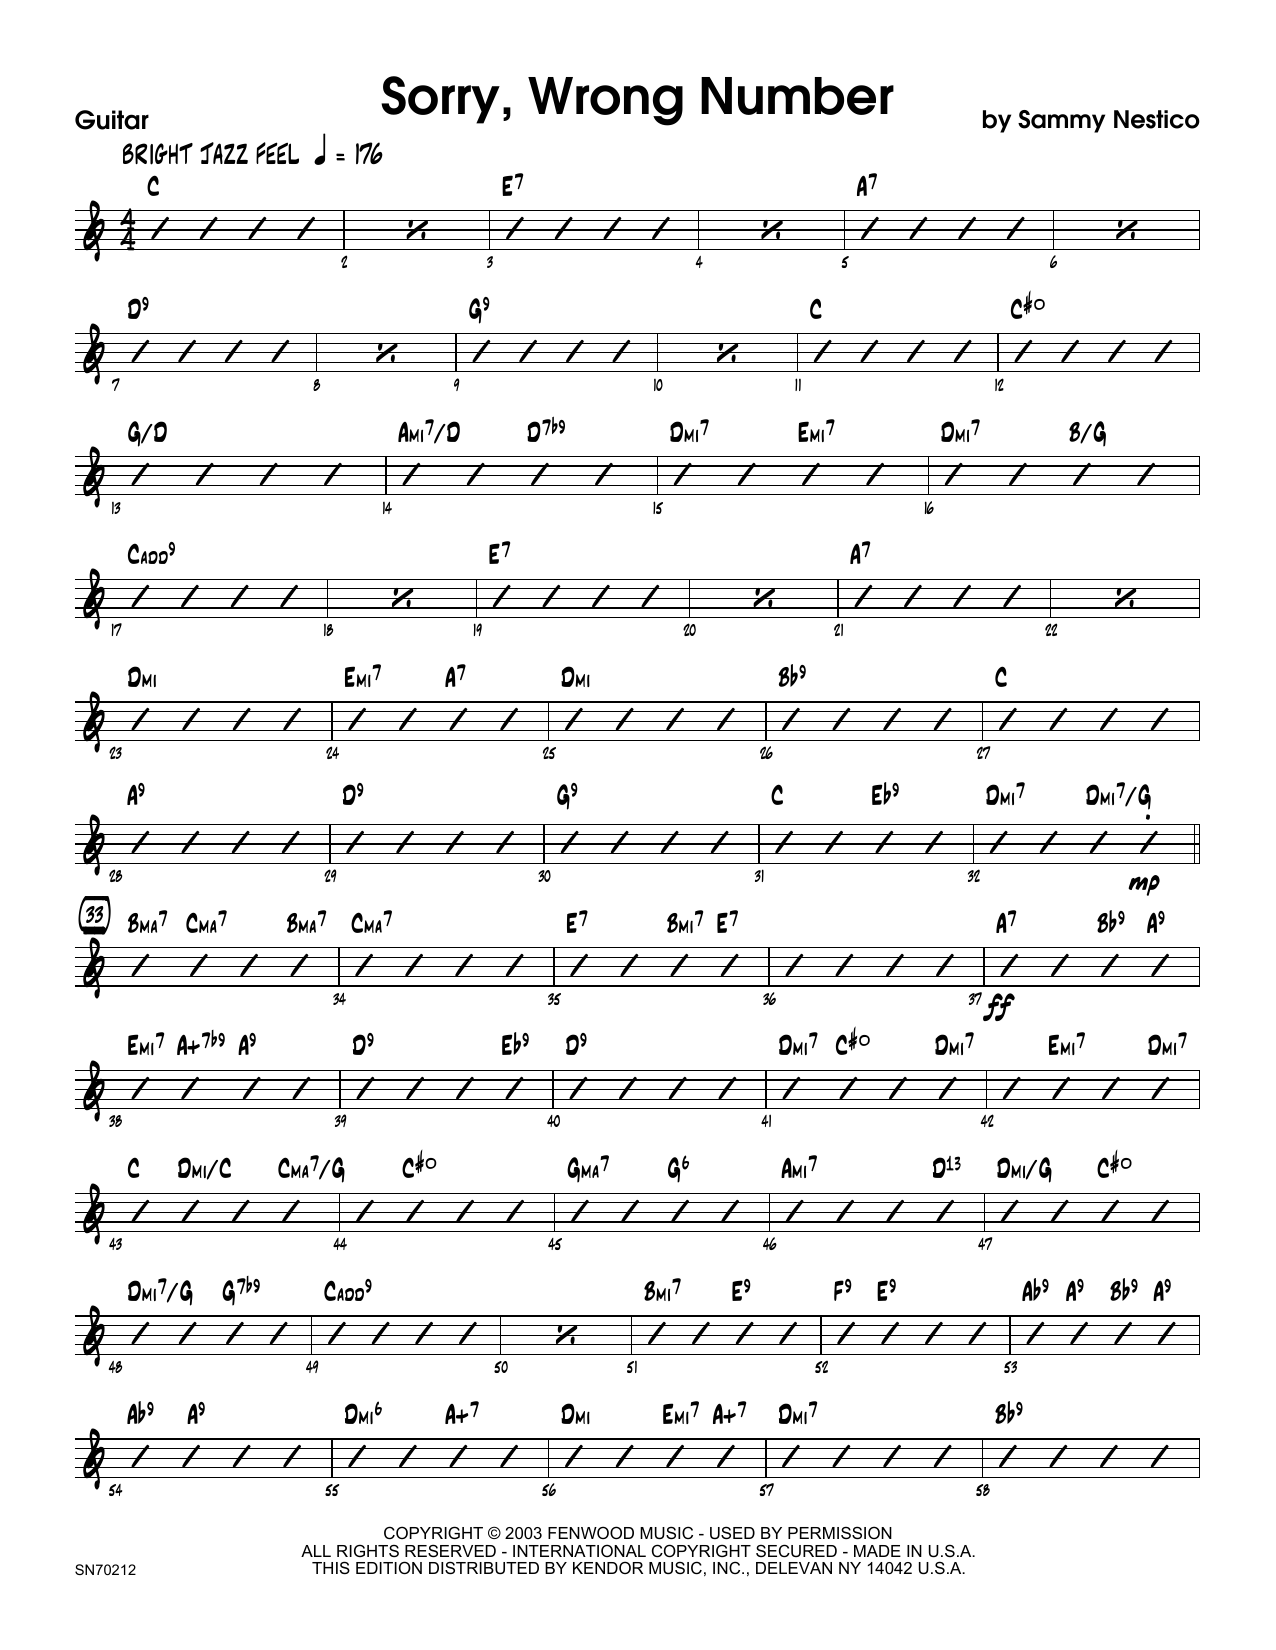 Download Sammy Nestico Sorry, Wrong Number - Guitar Sheet Music